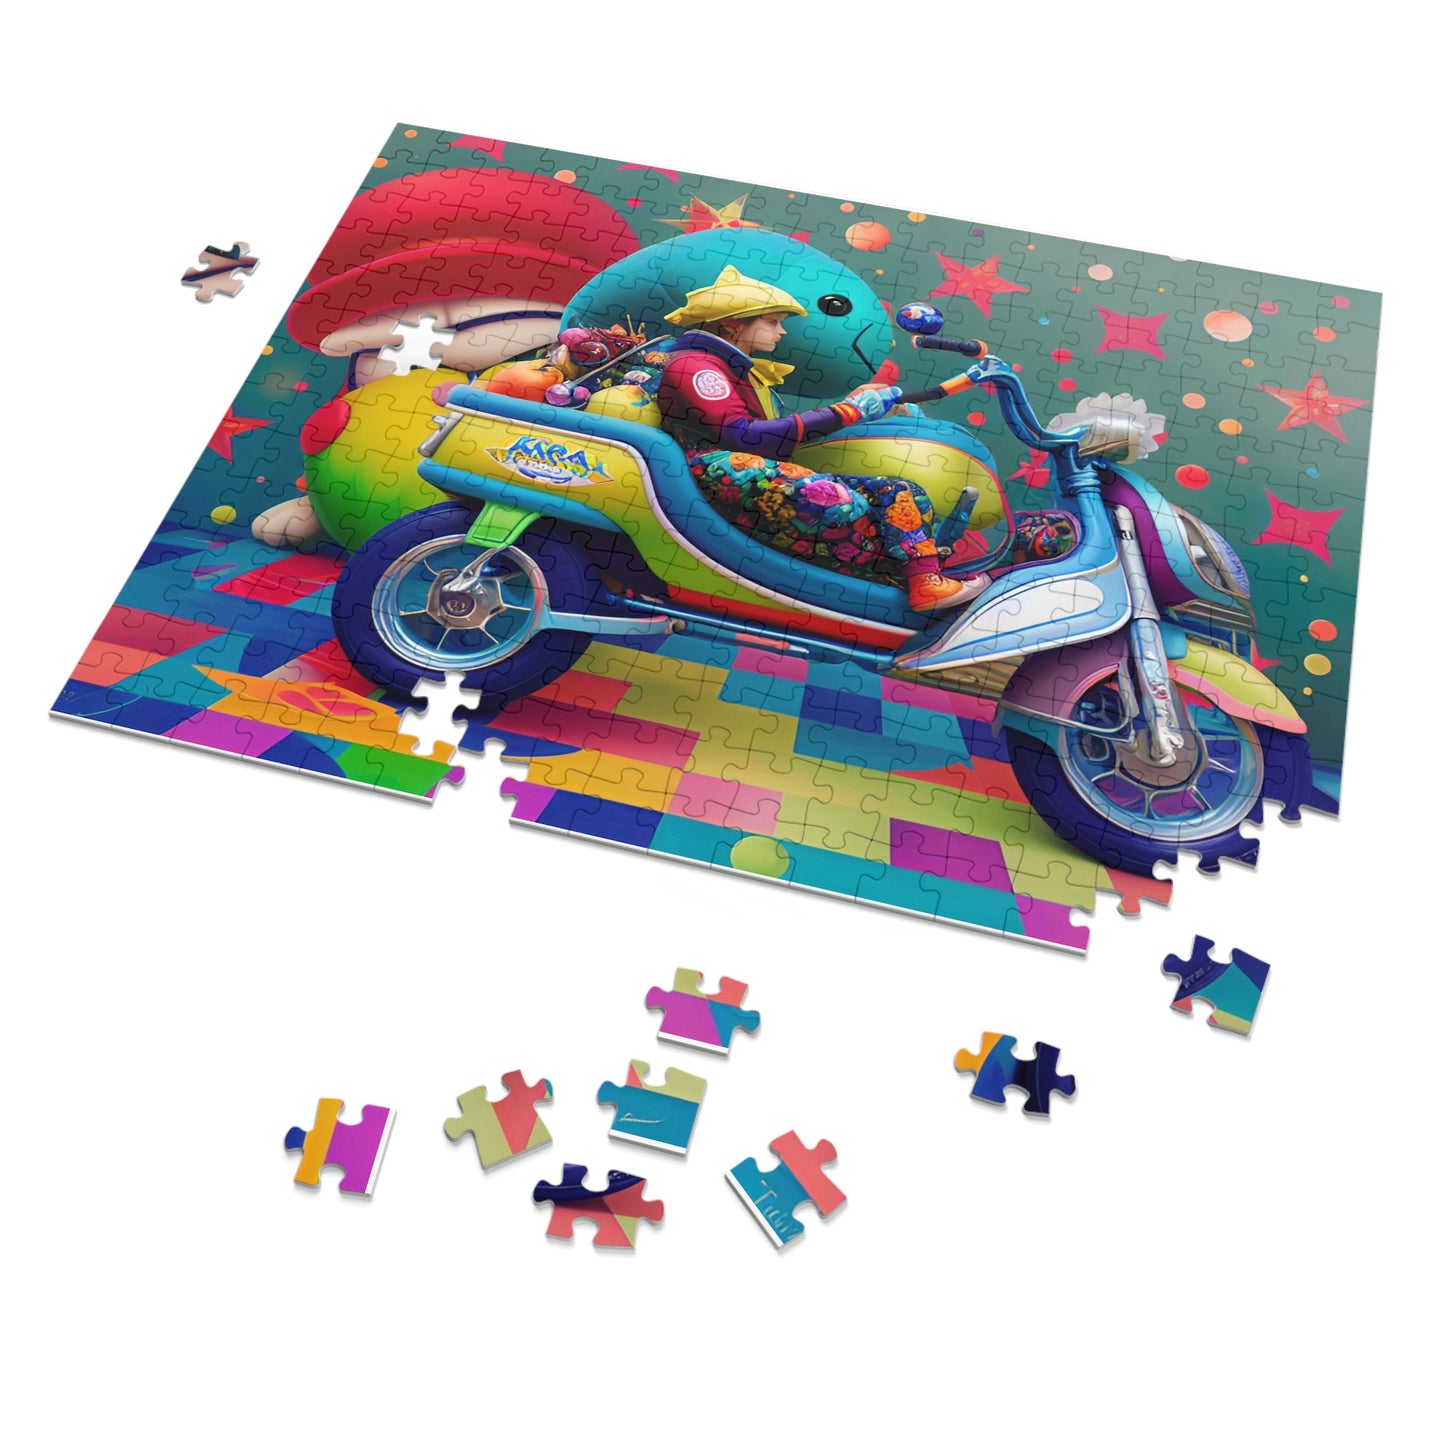 Video Game-inspired Jigsaw Puzzle, 252-Piece